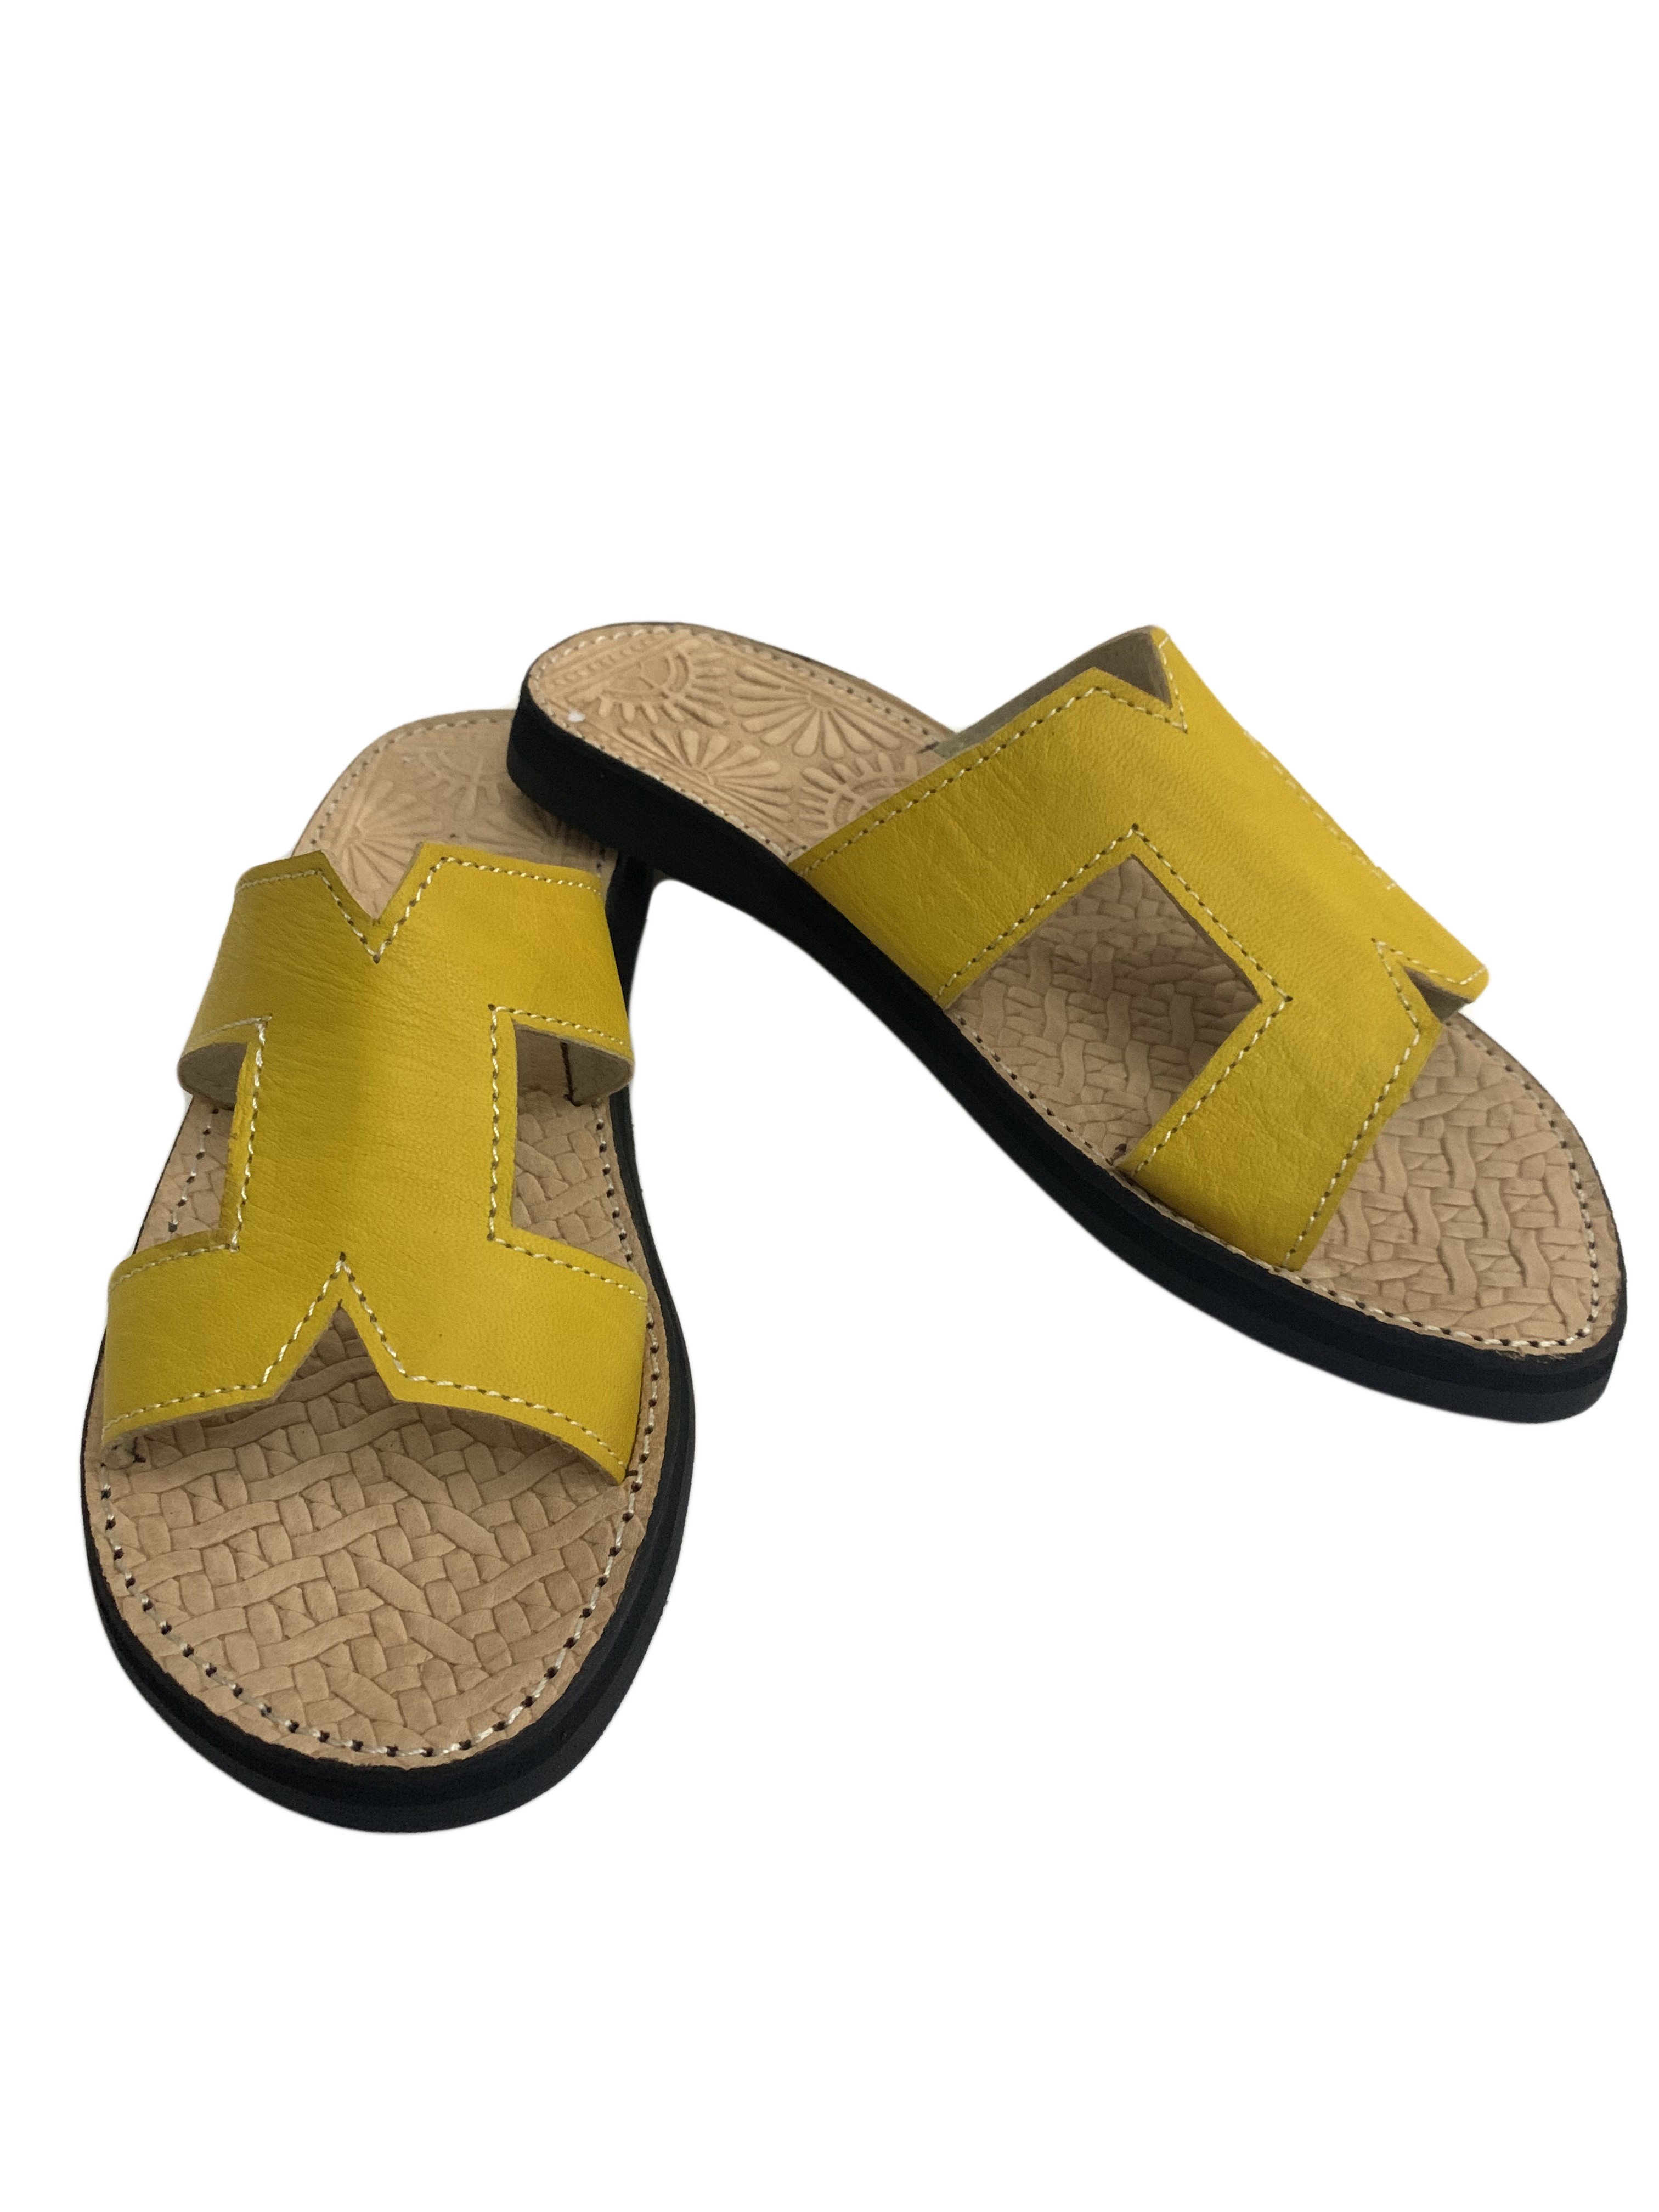 H real leather sandal for women